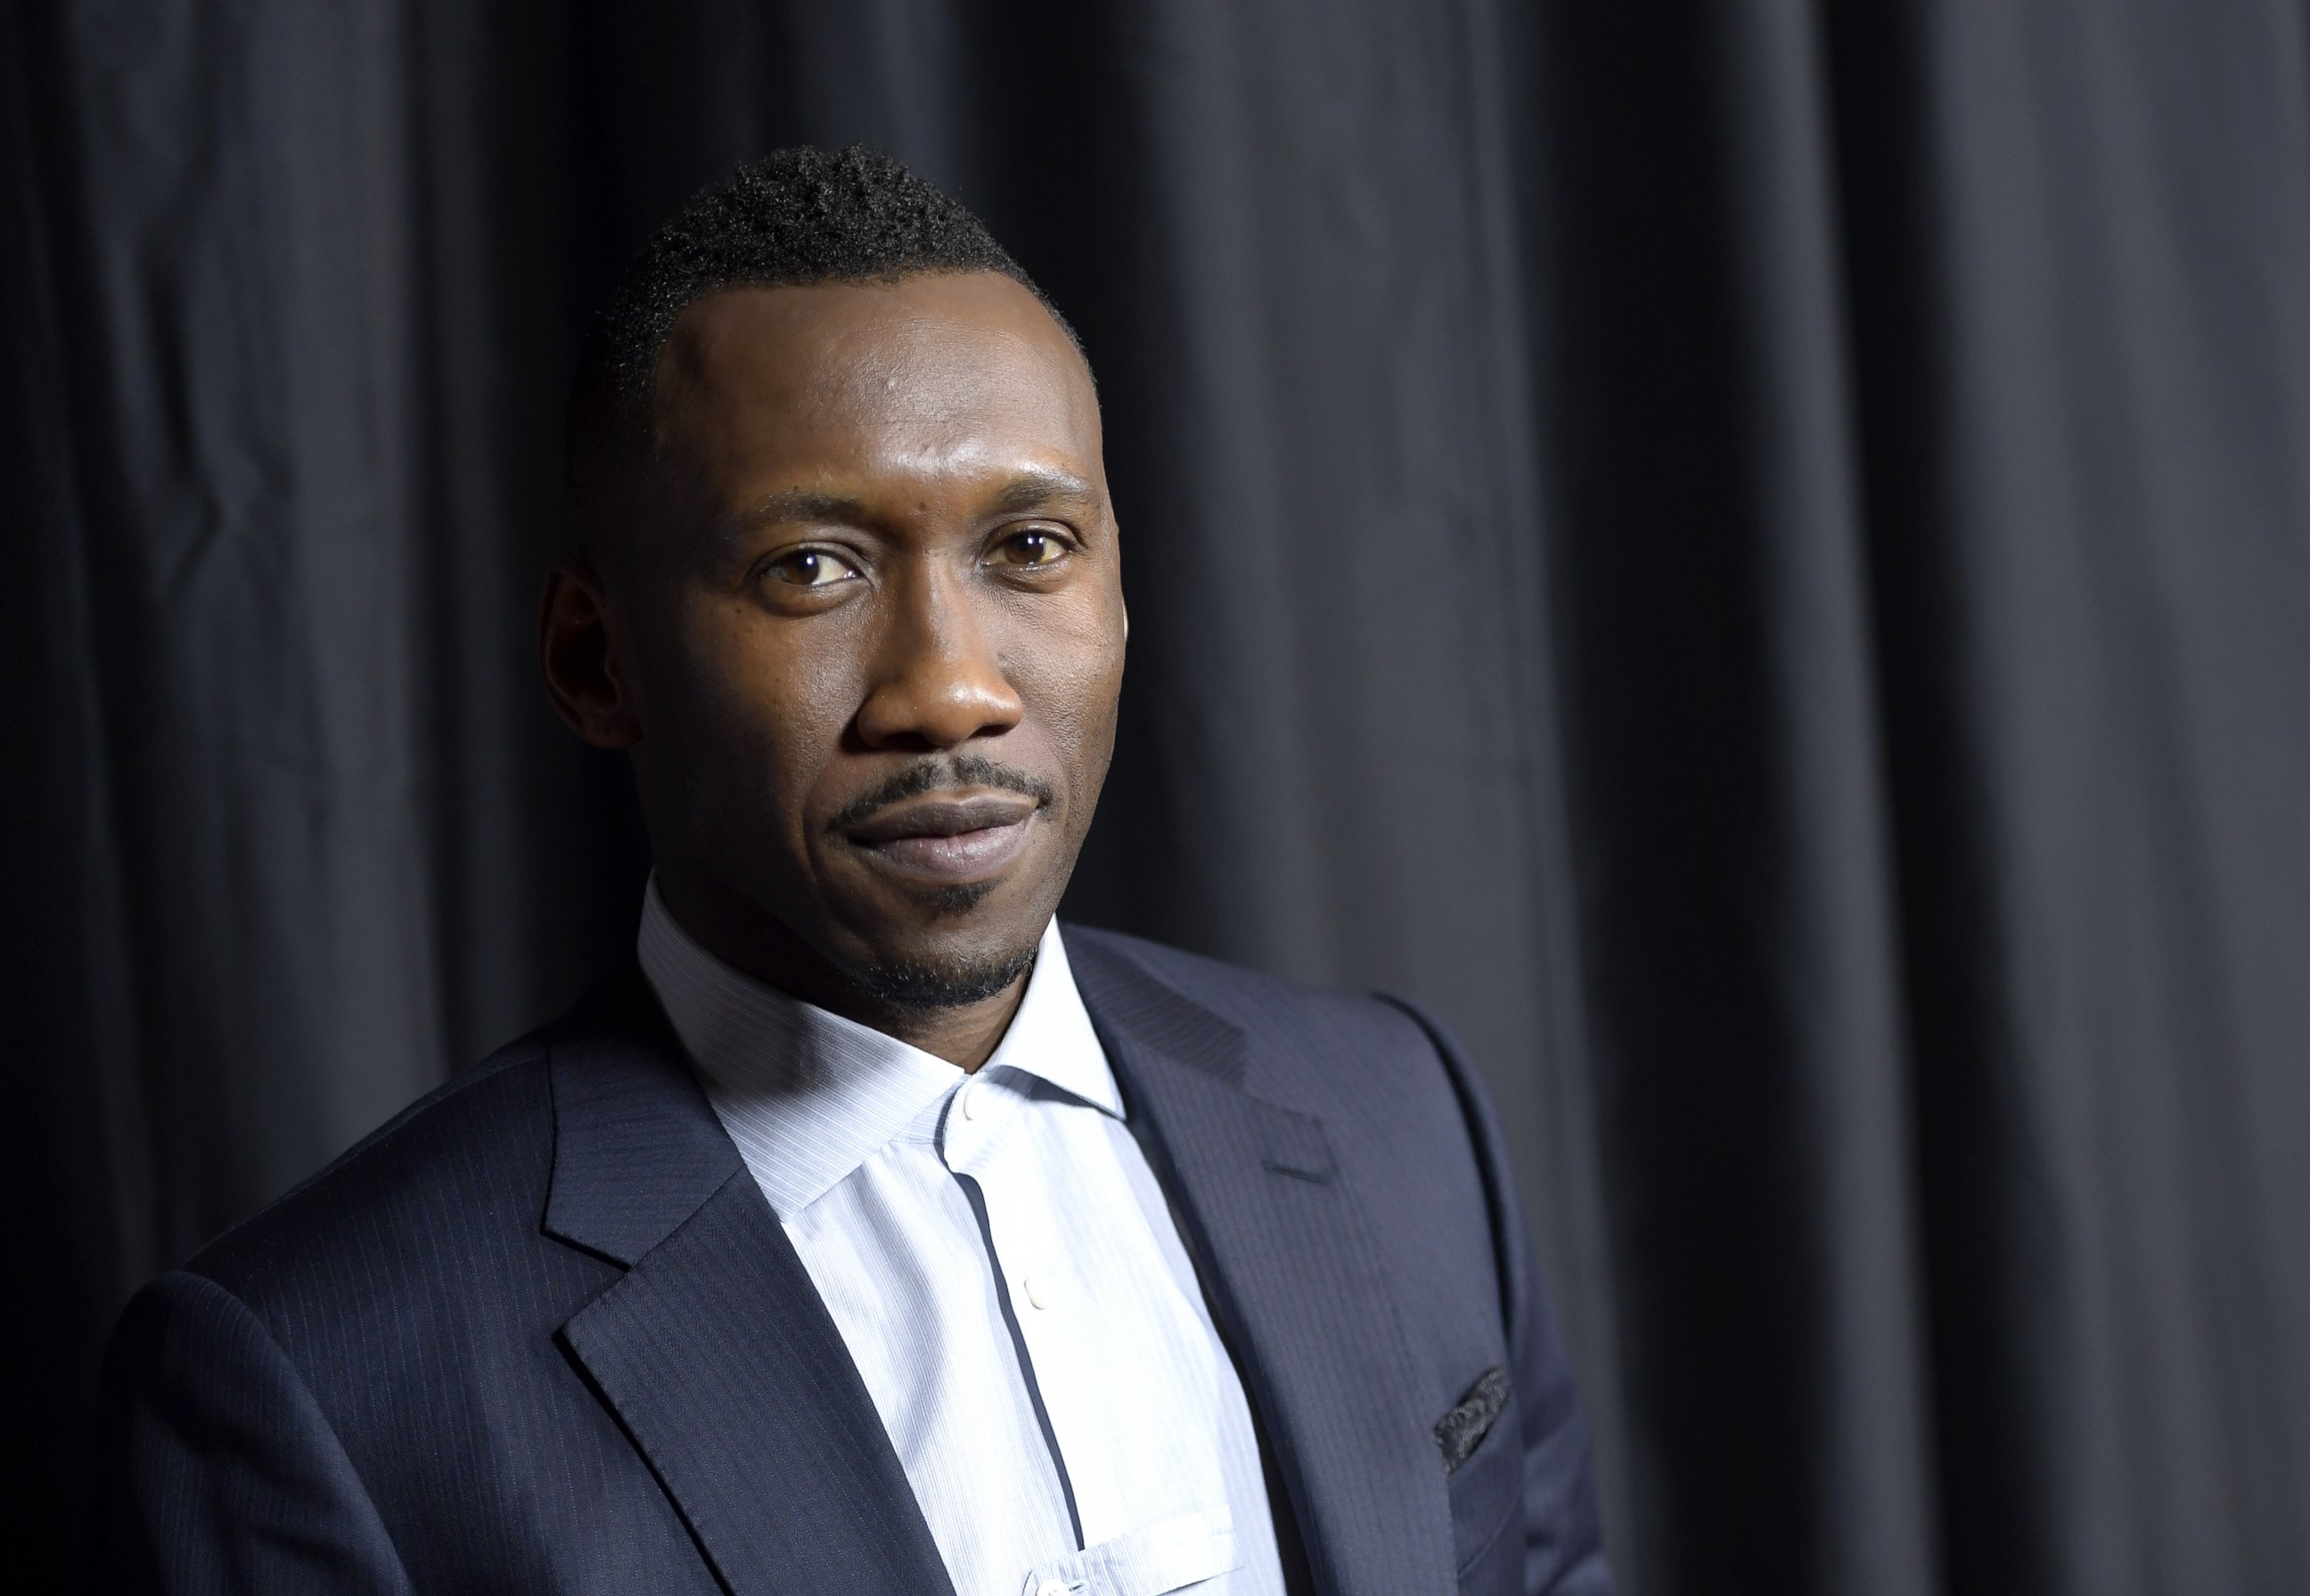 PHOTO: Actor Mahershala Ali attends the 42nd annual Los Angeles Film Critics Association Awards at InterContinental Los Angeles Century City, Jan. 14, 2017, in Los Angeles, California.